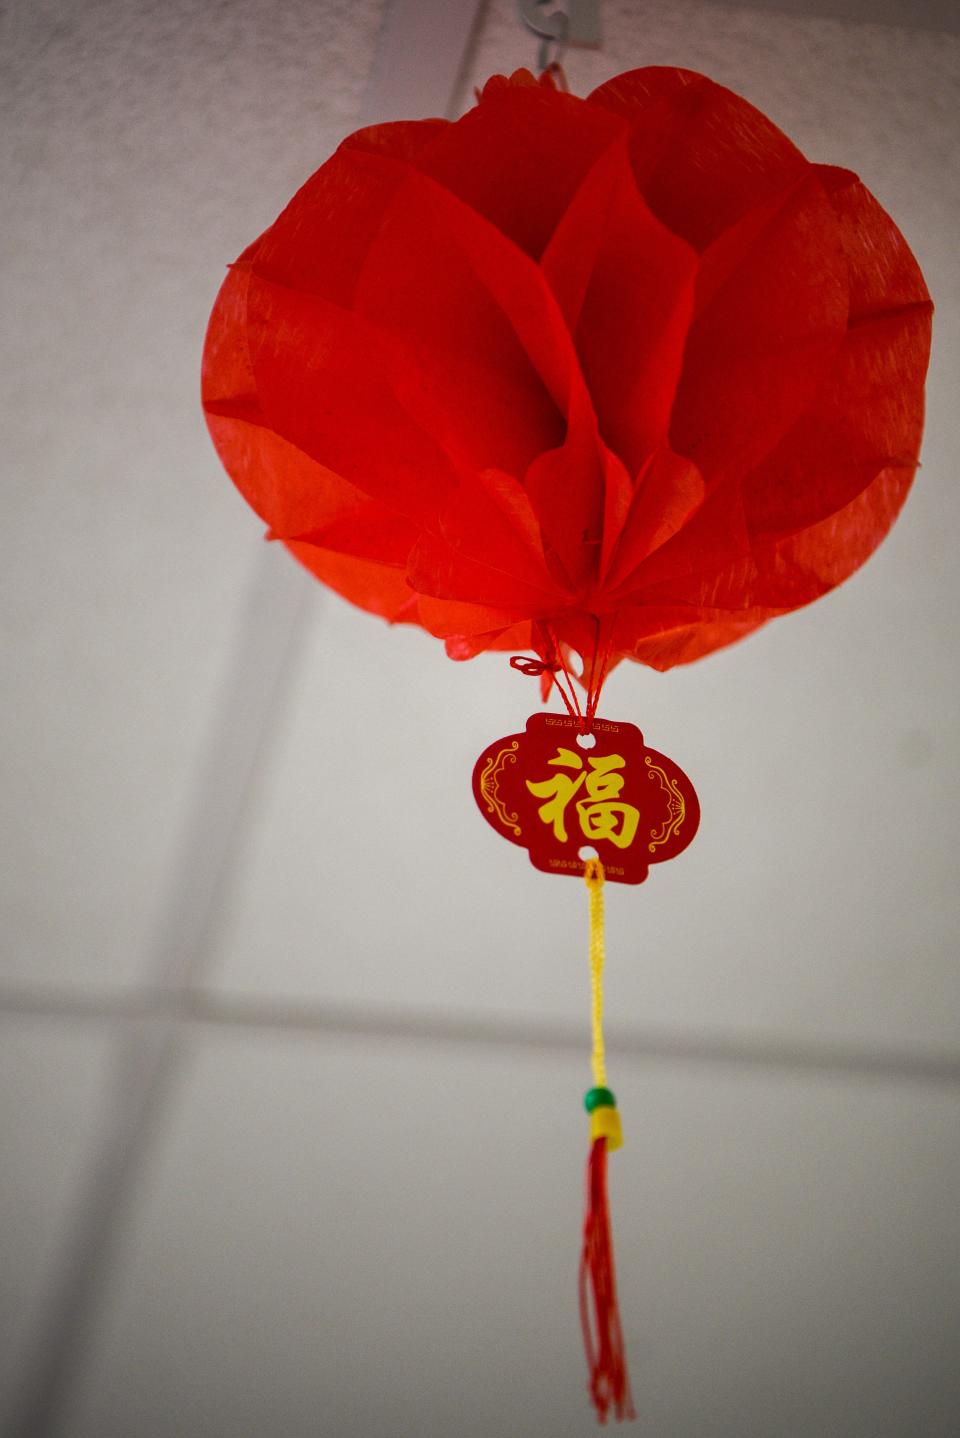 The Belleville Historical Society and the Belleville Library set up a an exhibition about Chinese history in Belleville on Tuesday February 9, 2021. The exhibit is to celebrate 150 years of Chinese New Year in Belleville. 